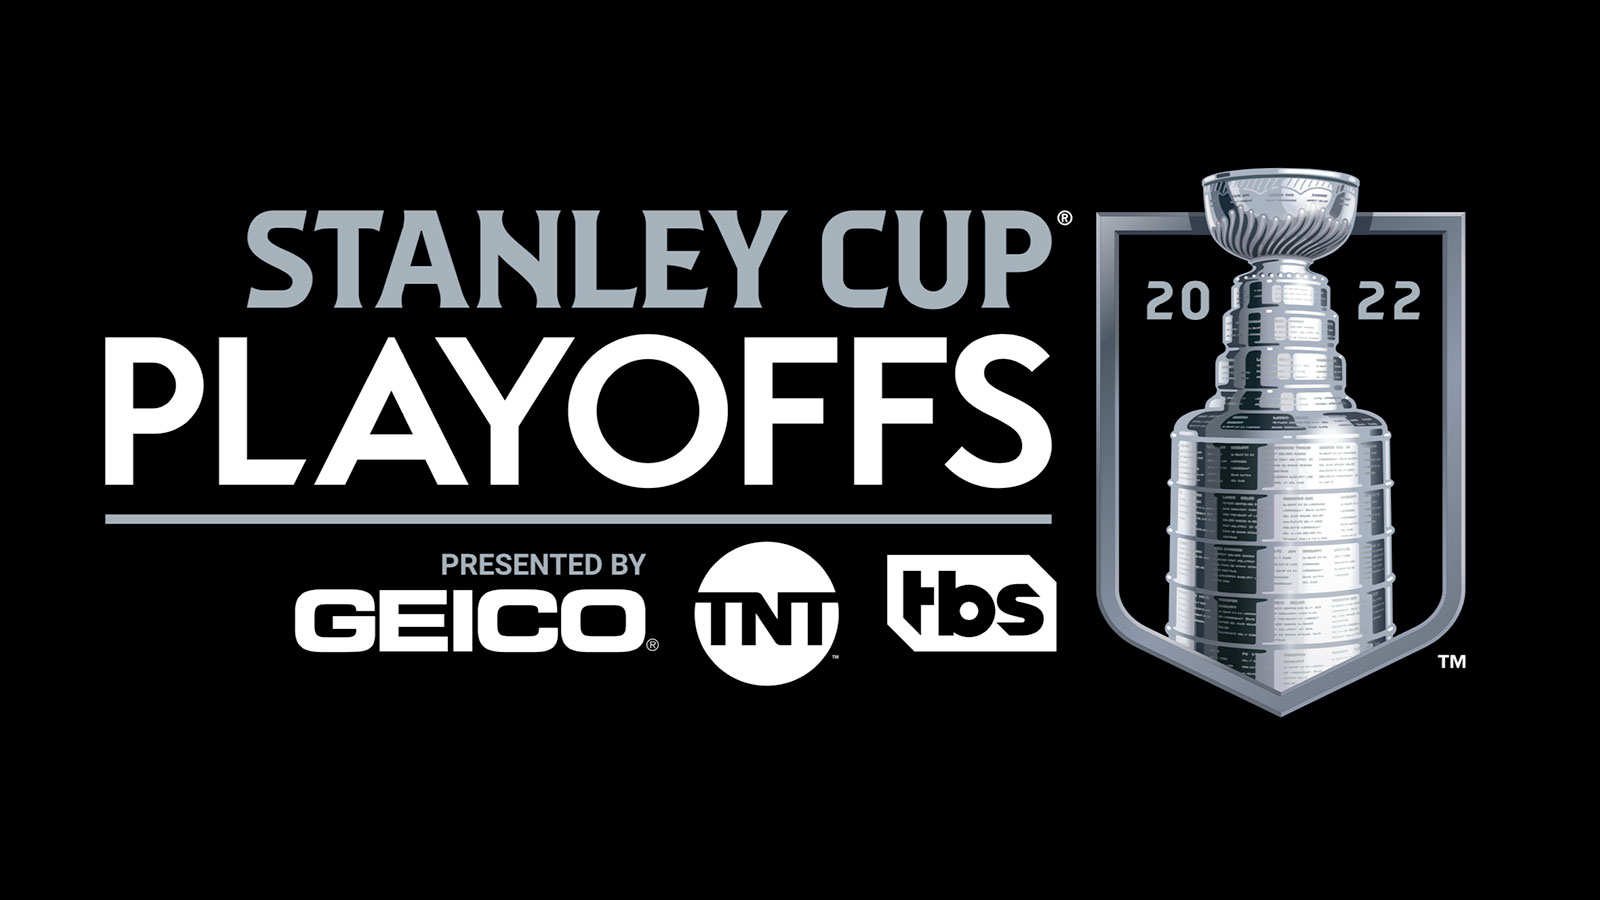 Turner Sports Announces Commentators for 2022 Stanley Cup Playoffs Presented by GEICO Triple-Header of Game 6s on TNT and TBS — Friday, May 13 Warner Bros